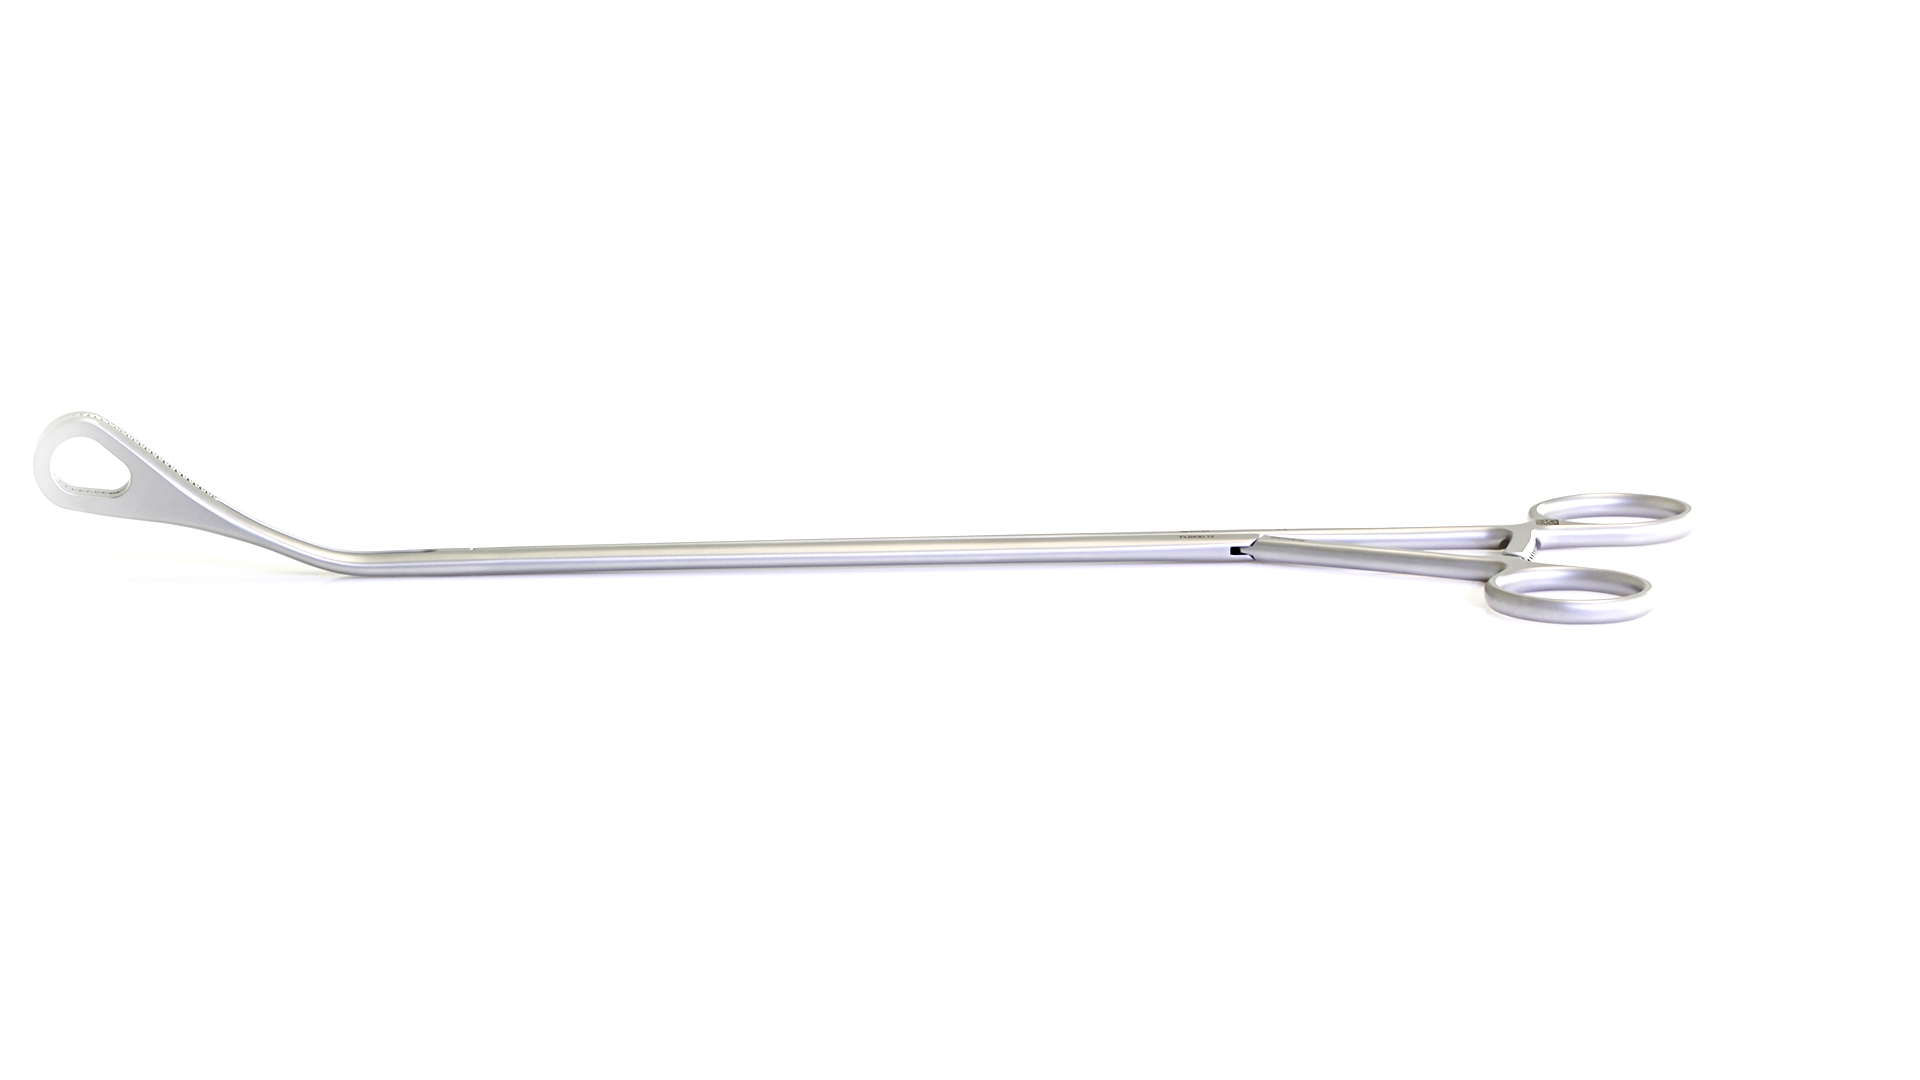 VATS Foerster Forceps - Curved Left 20mm Oval Serrated jaws